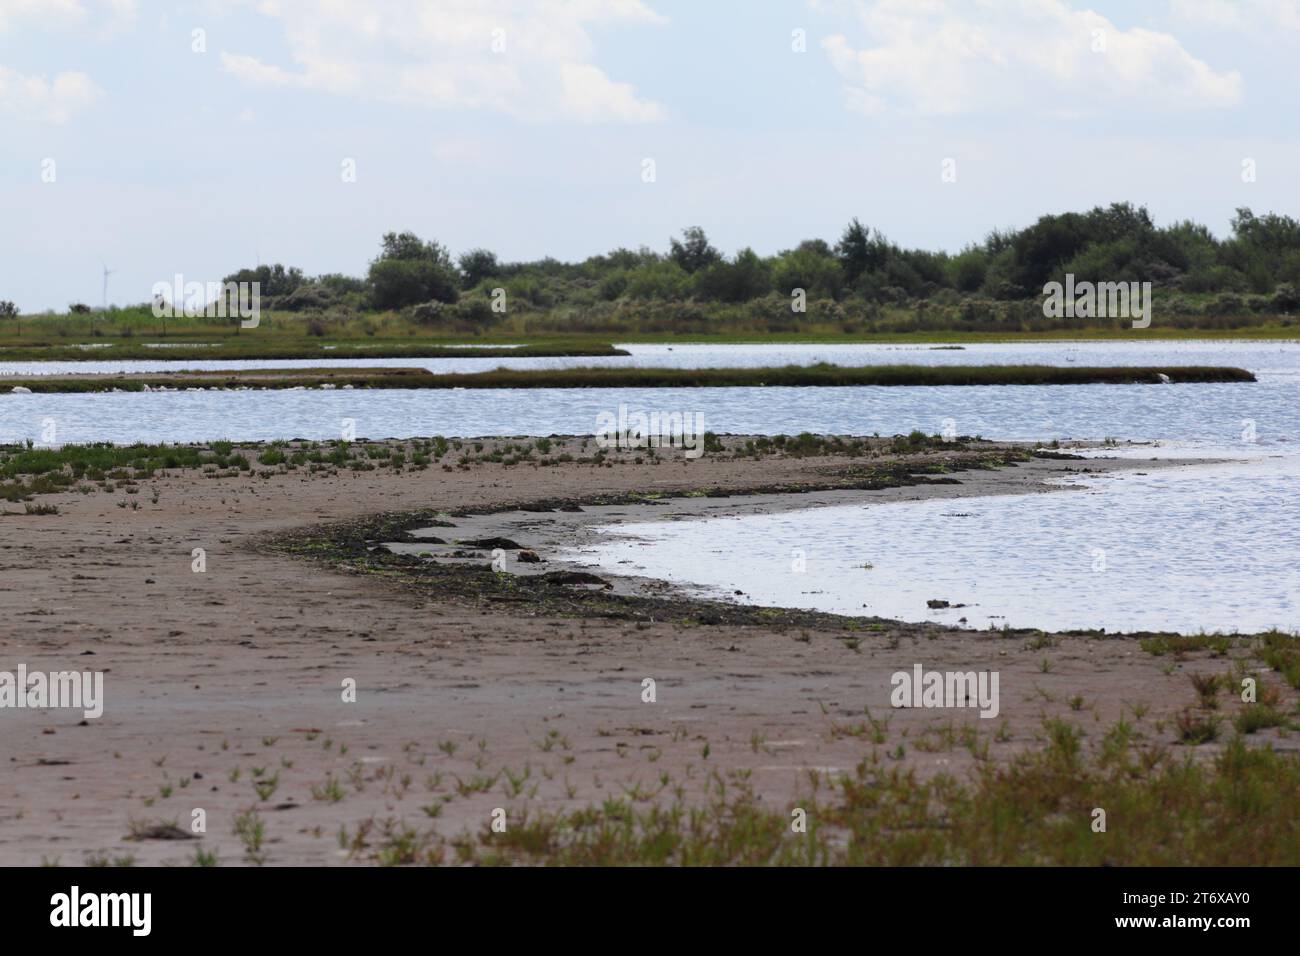 Water surface with small sand island, blue sky in background Stock Photo